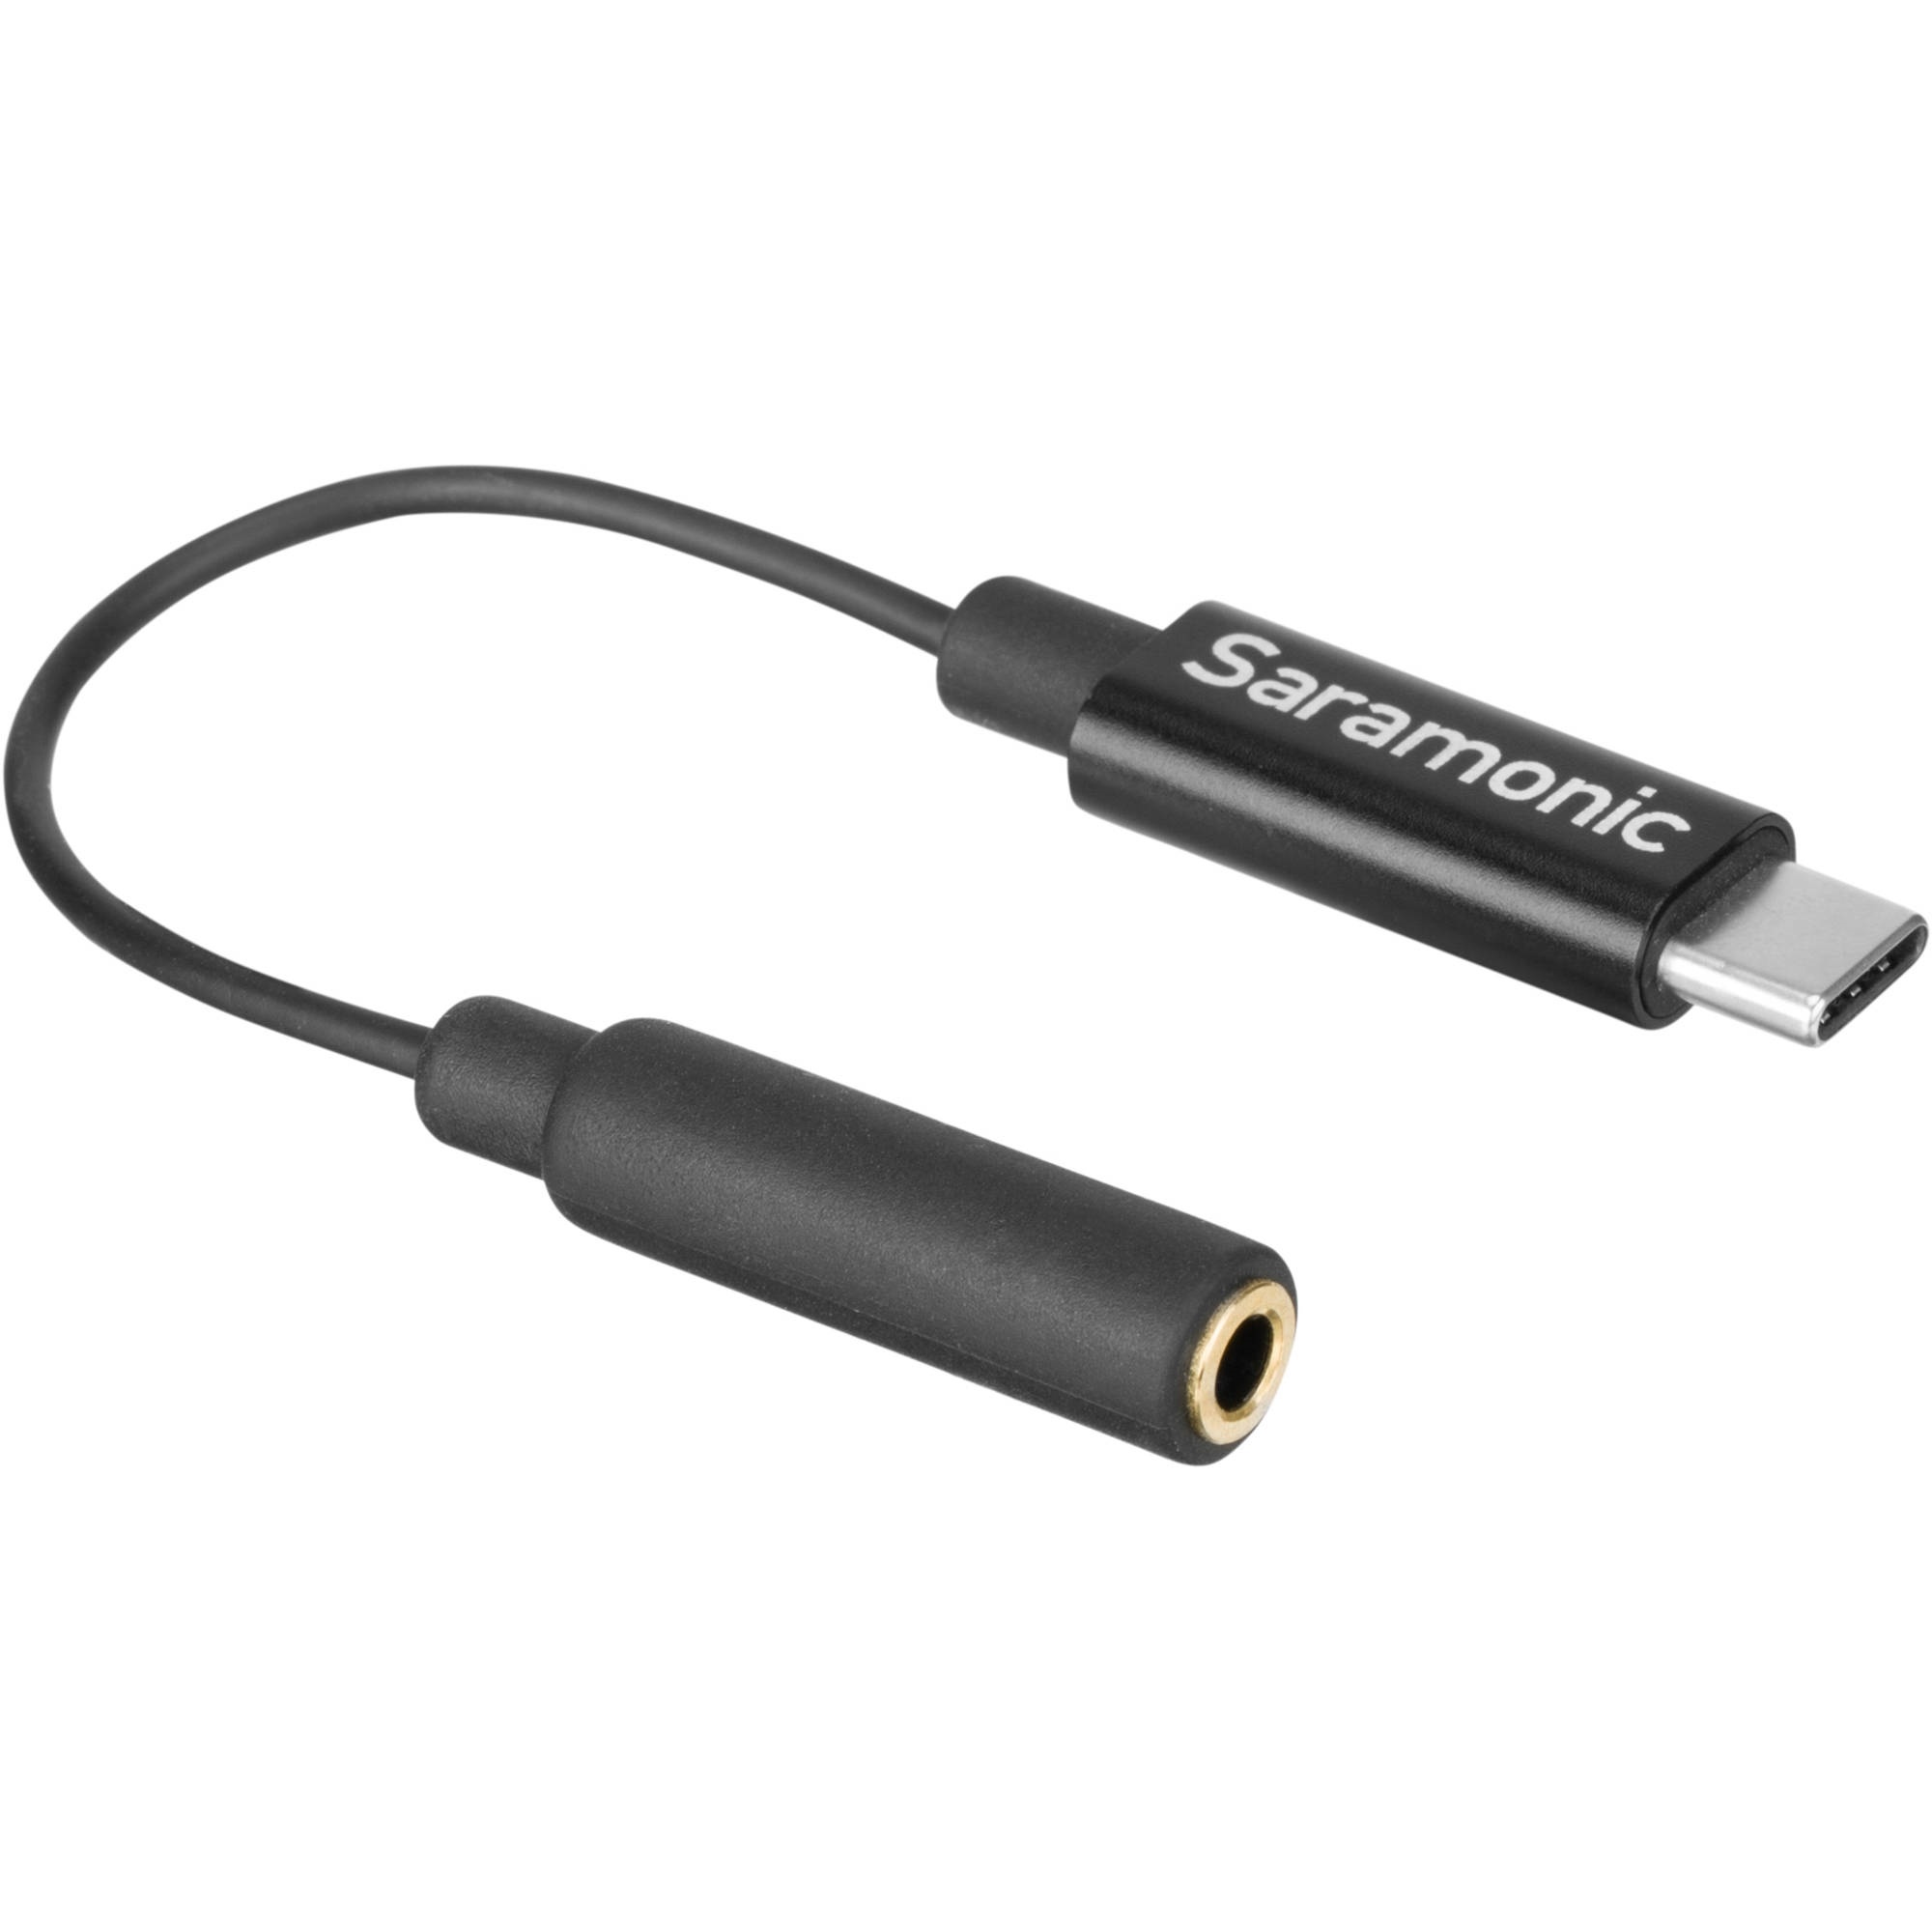 Saramonic 3.5mm TRS Female to USB Type-C Adapter Cable for Mono/Stereo Audio to Android